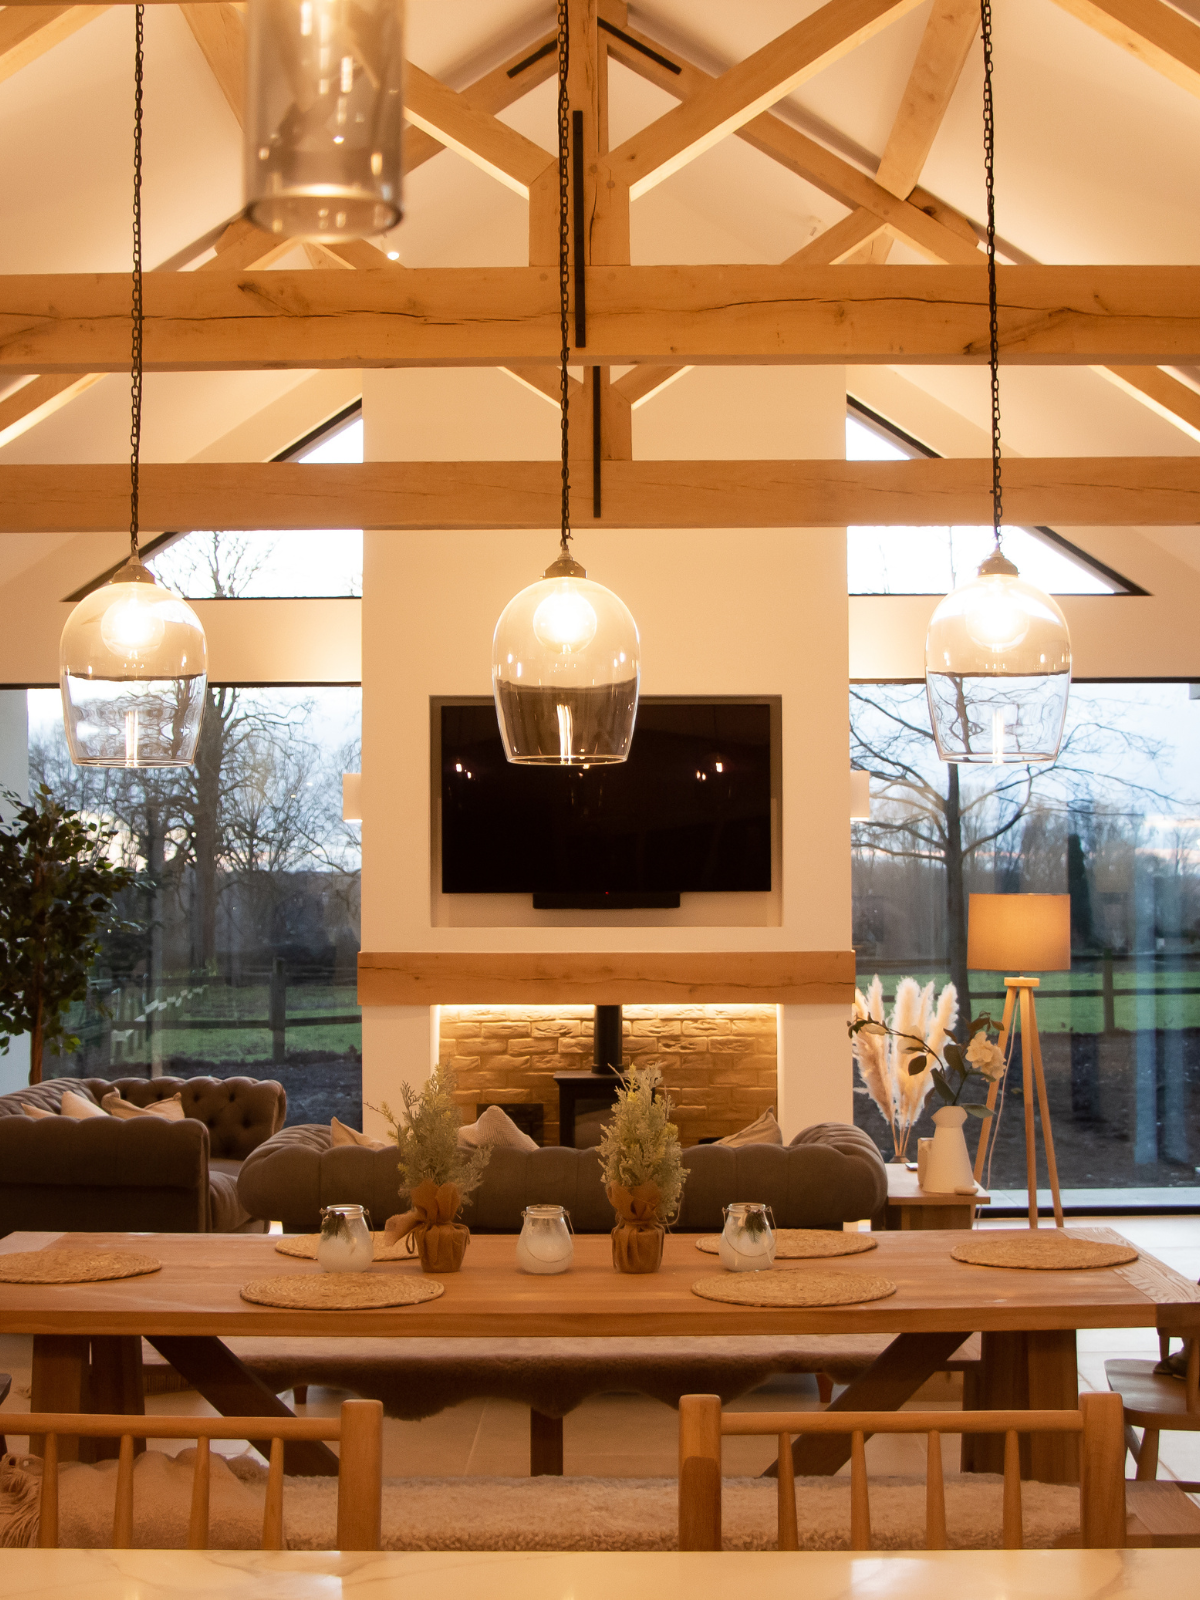 Suffolk home interior in the kitchen with full length windows, smart TV and layered lighting design